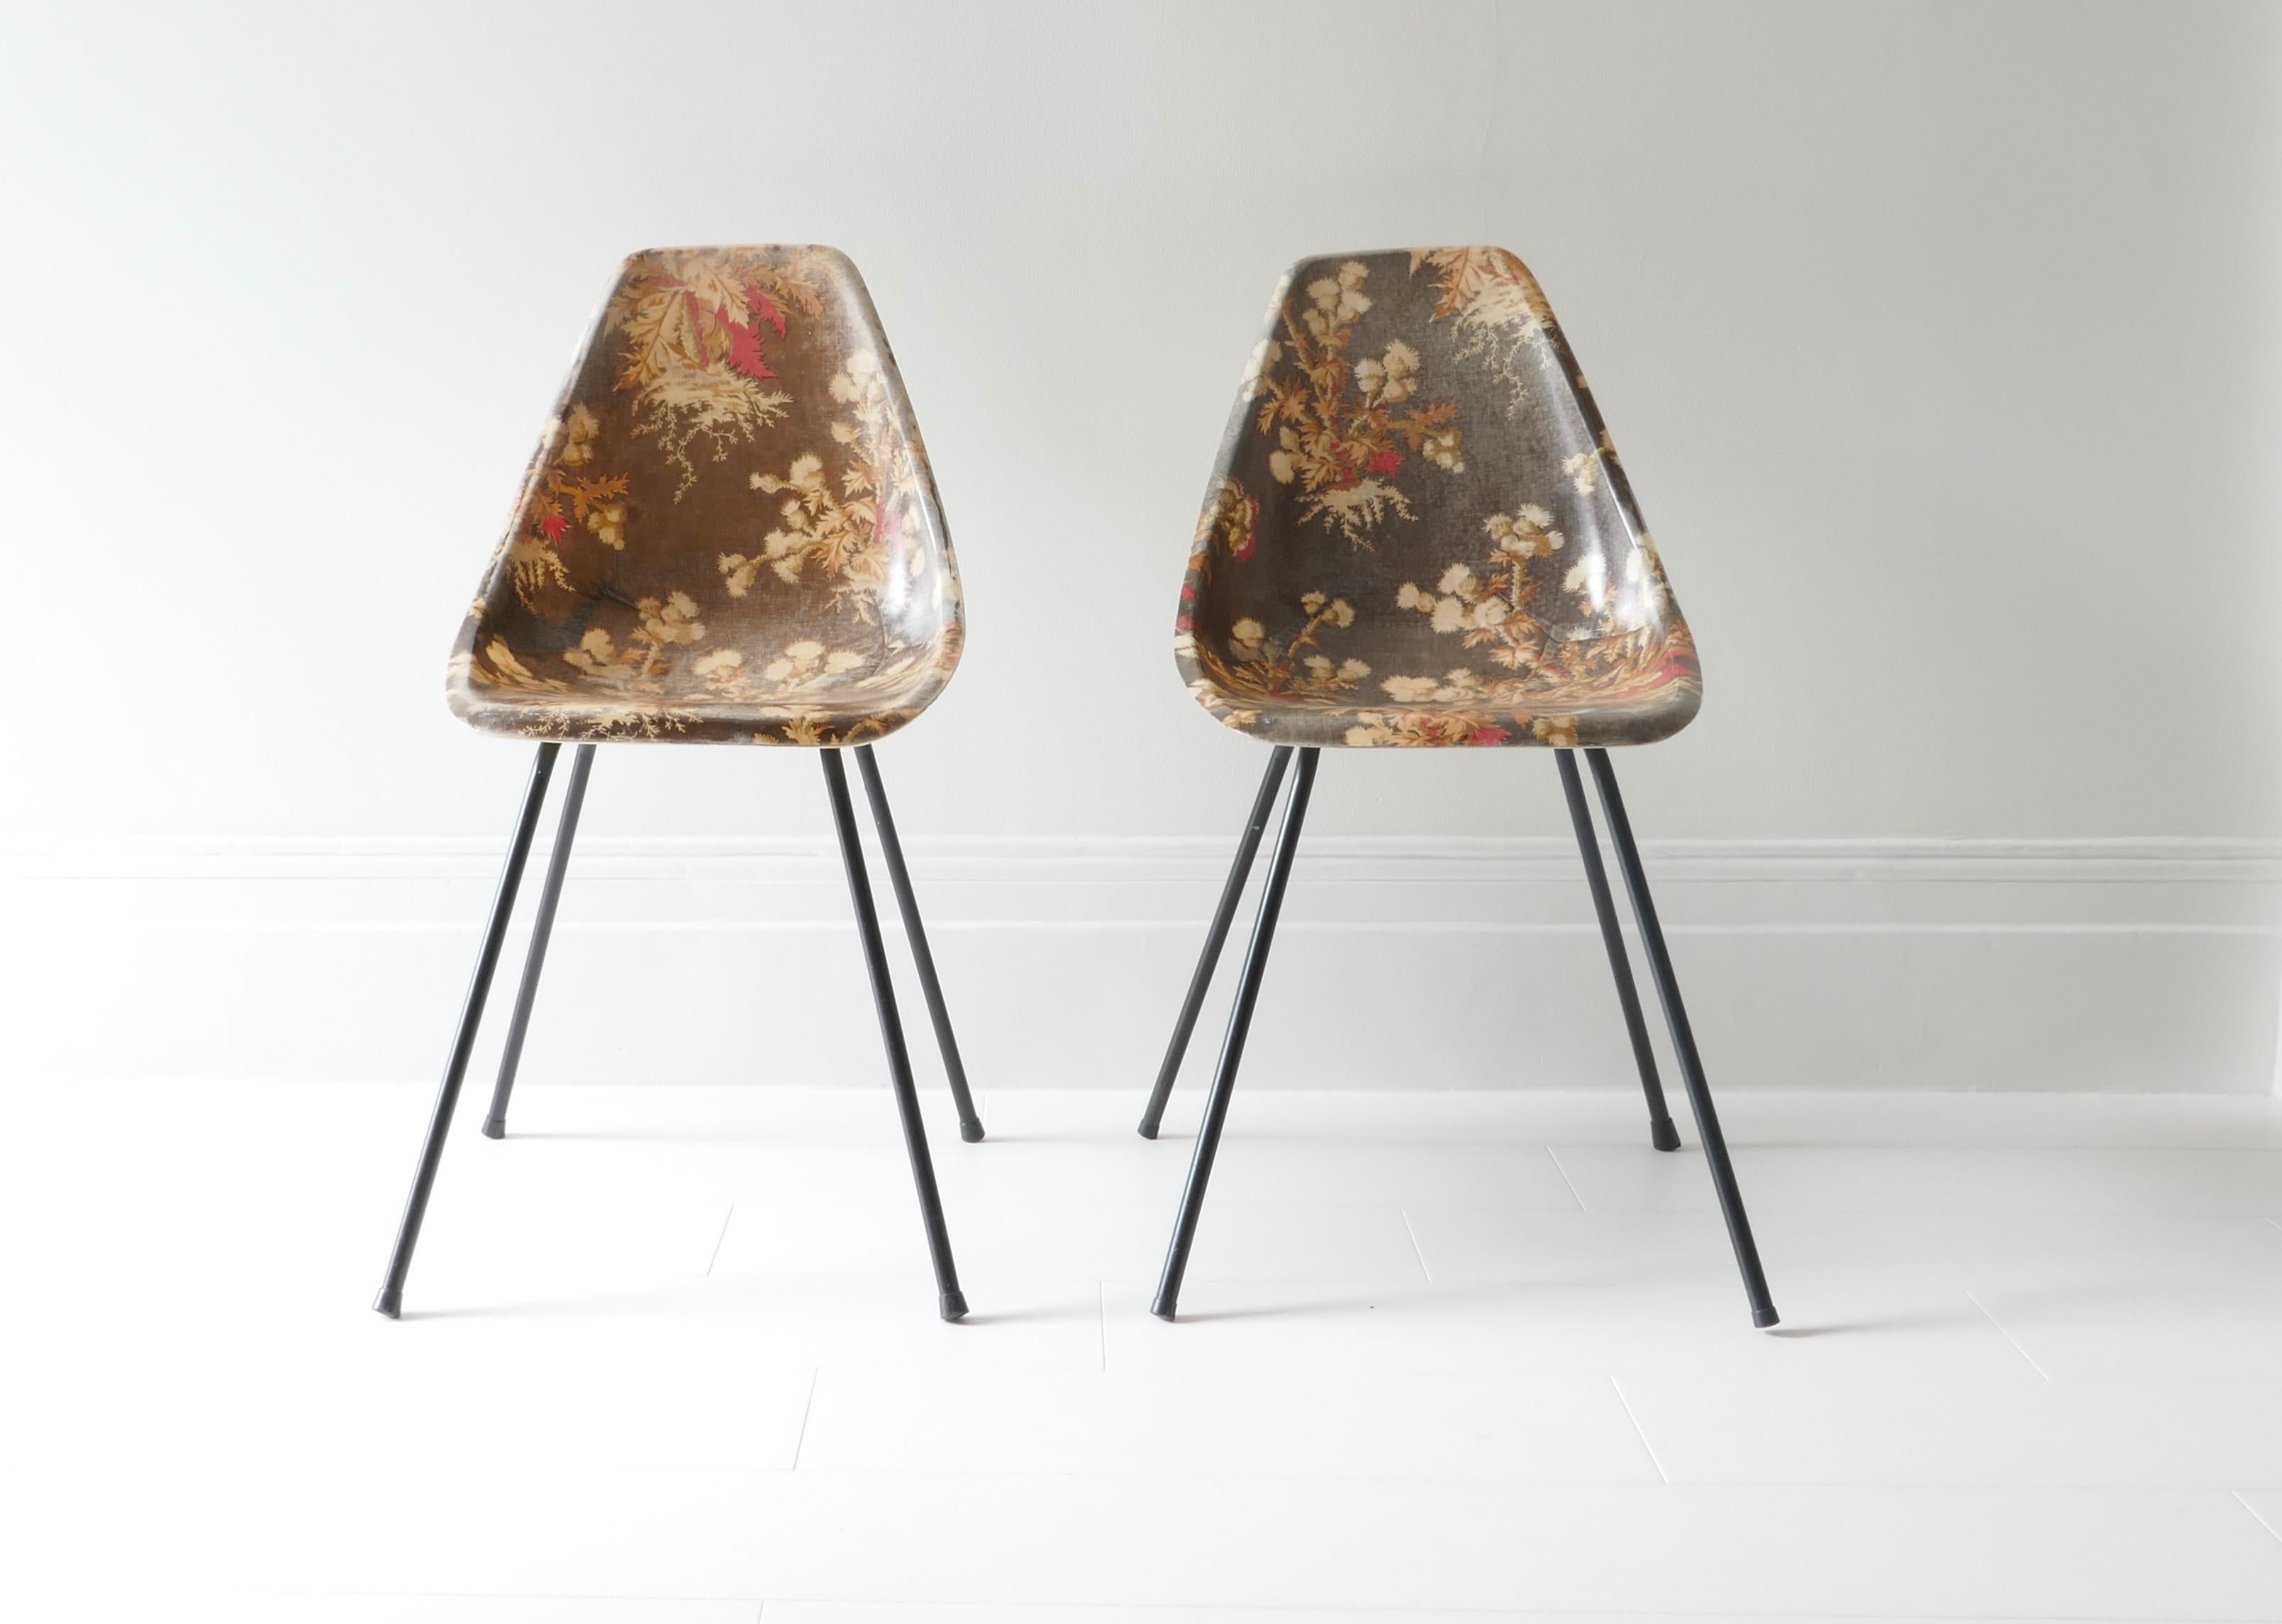 A rare set of 2 fibreglass chairs by Rene Jean Caillette. 
Brown background and multicolour floral pattern. 
Designed and produced in France between 1950-1959.

René-Jean Caillette
1919 - 2005

Born in 1919, he was the oldest of this